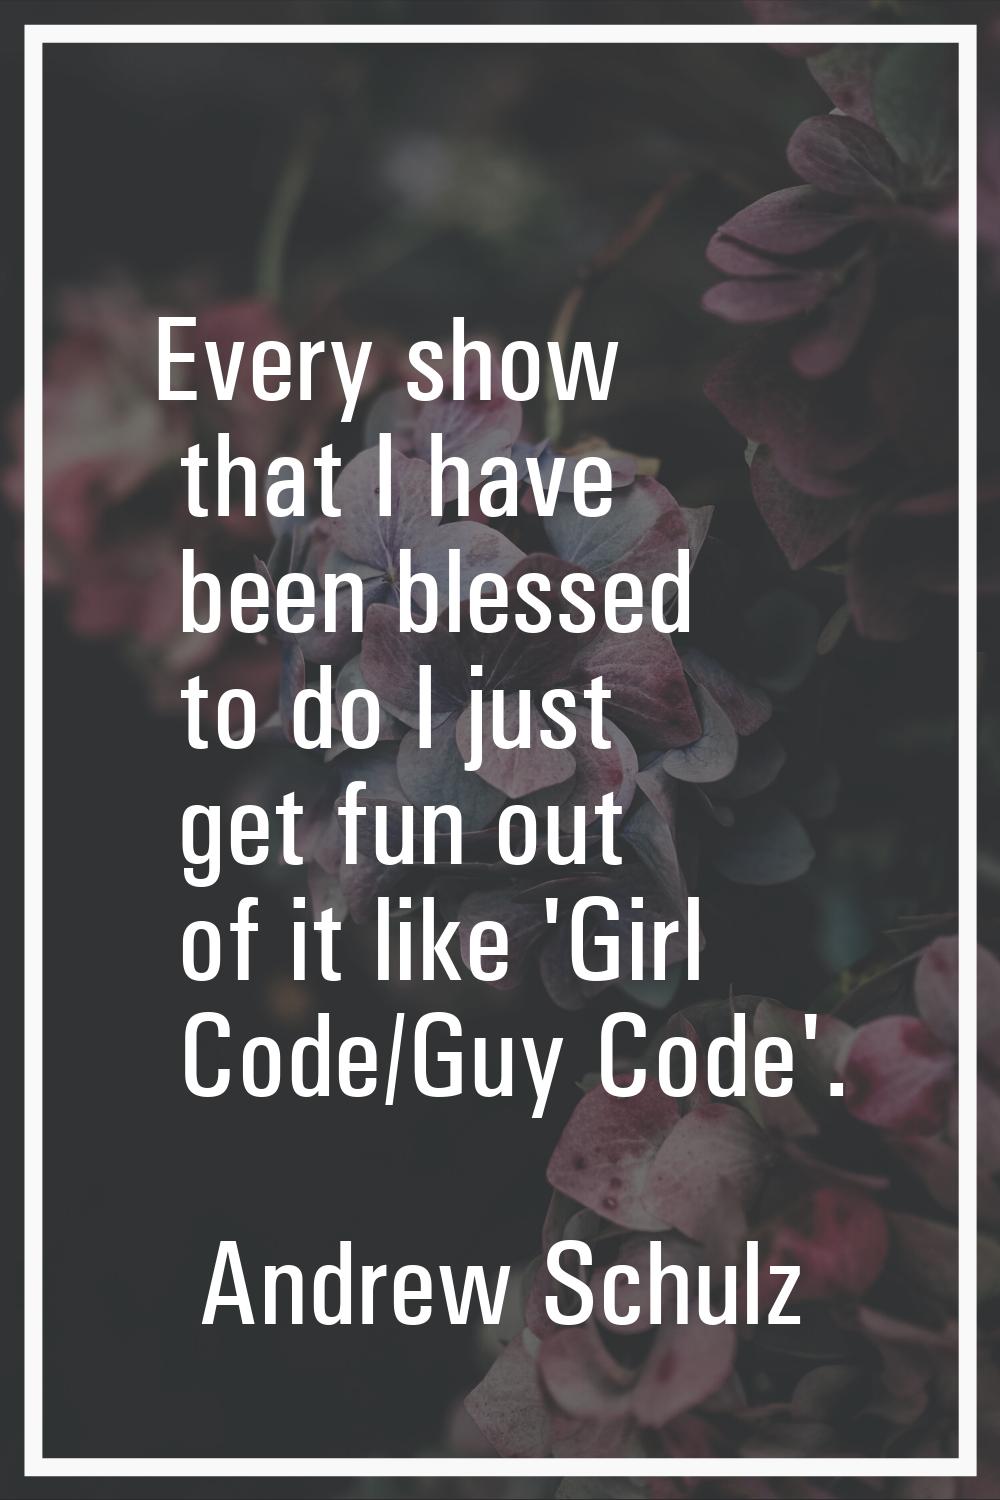 Every show that I have been blessed to do I just get fun out of it like 'Girl Code/Guy Code'.